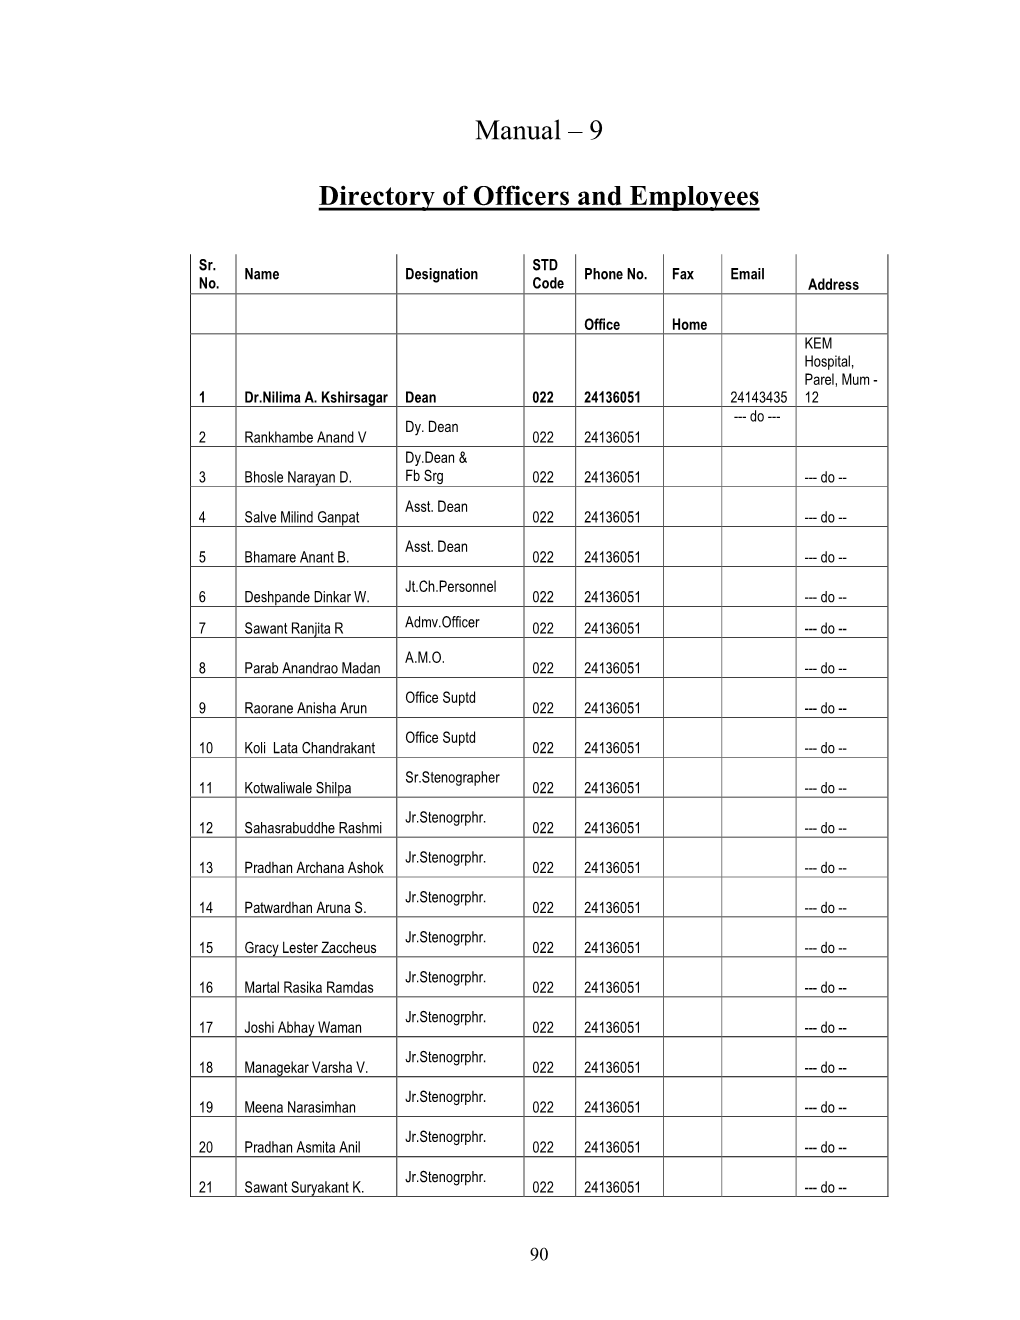 Manual – 9 Directory of Officers and Employees